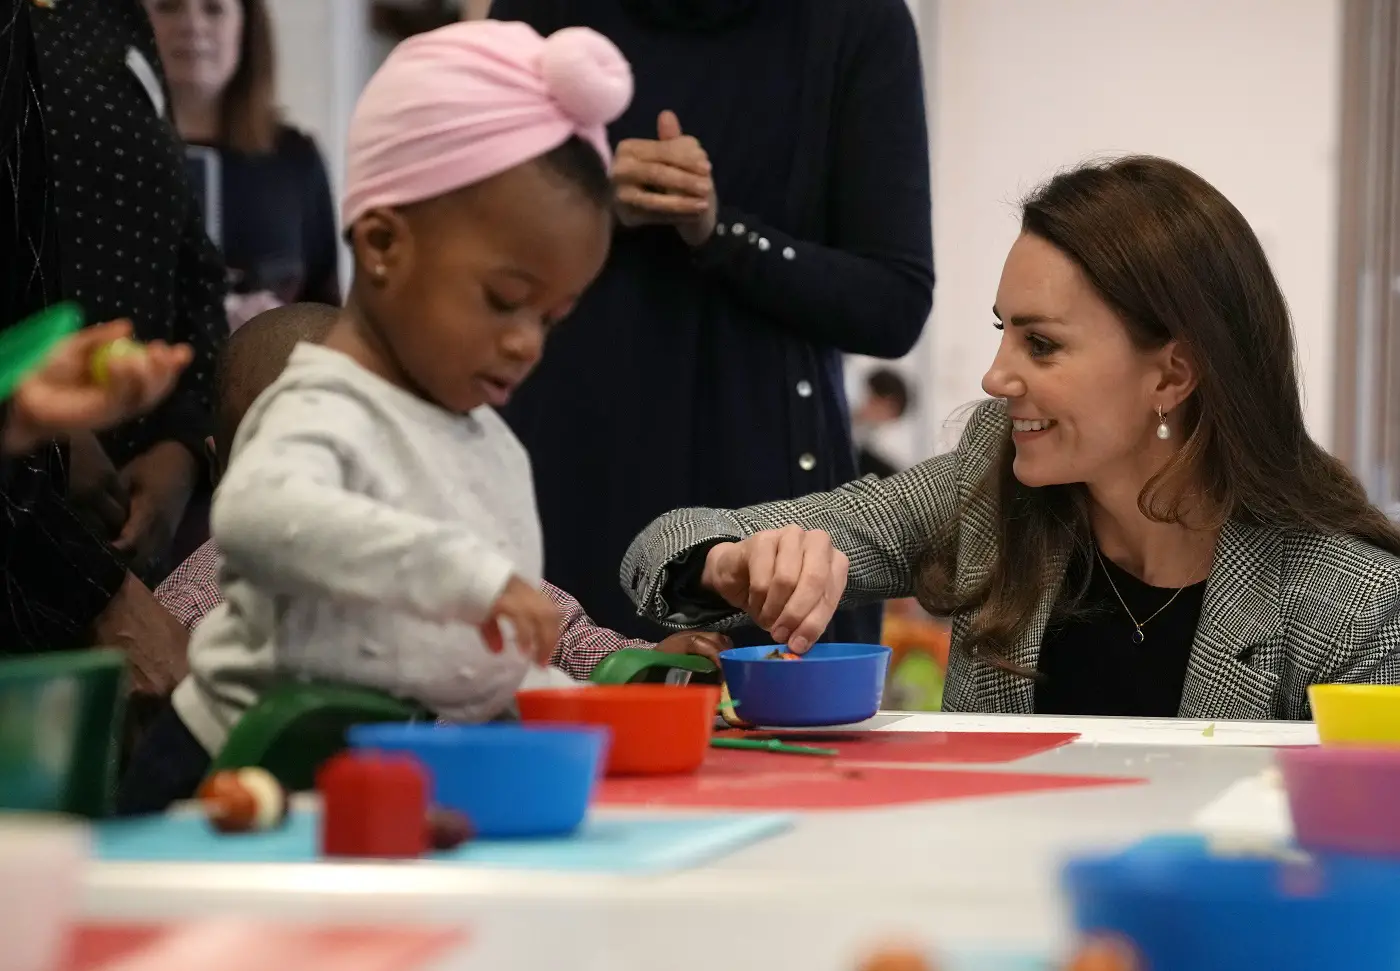 The Duchess of Cambridge visited PACT